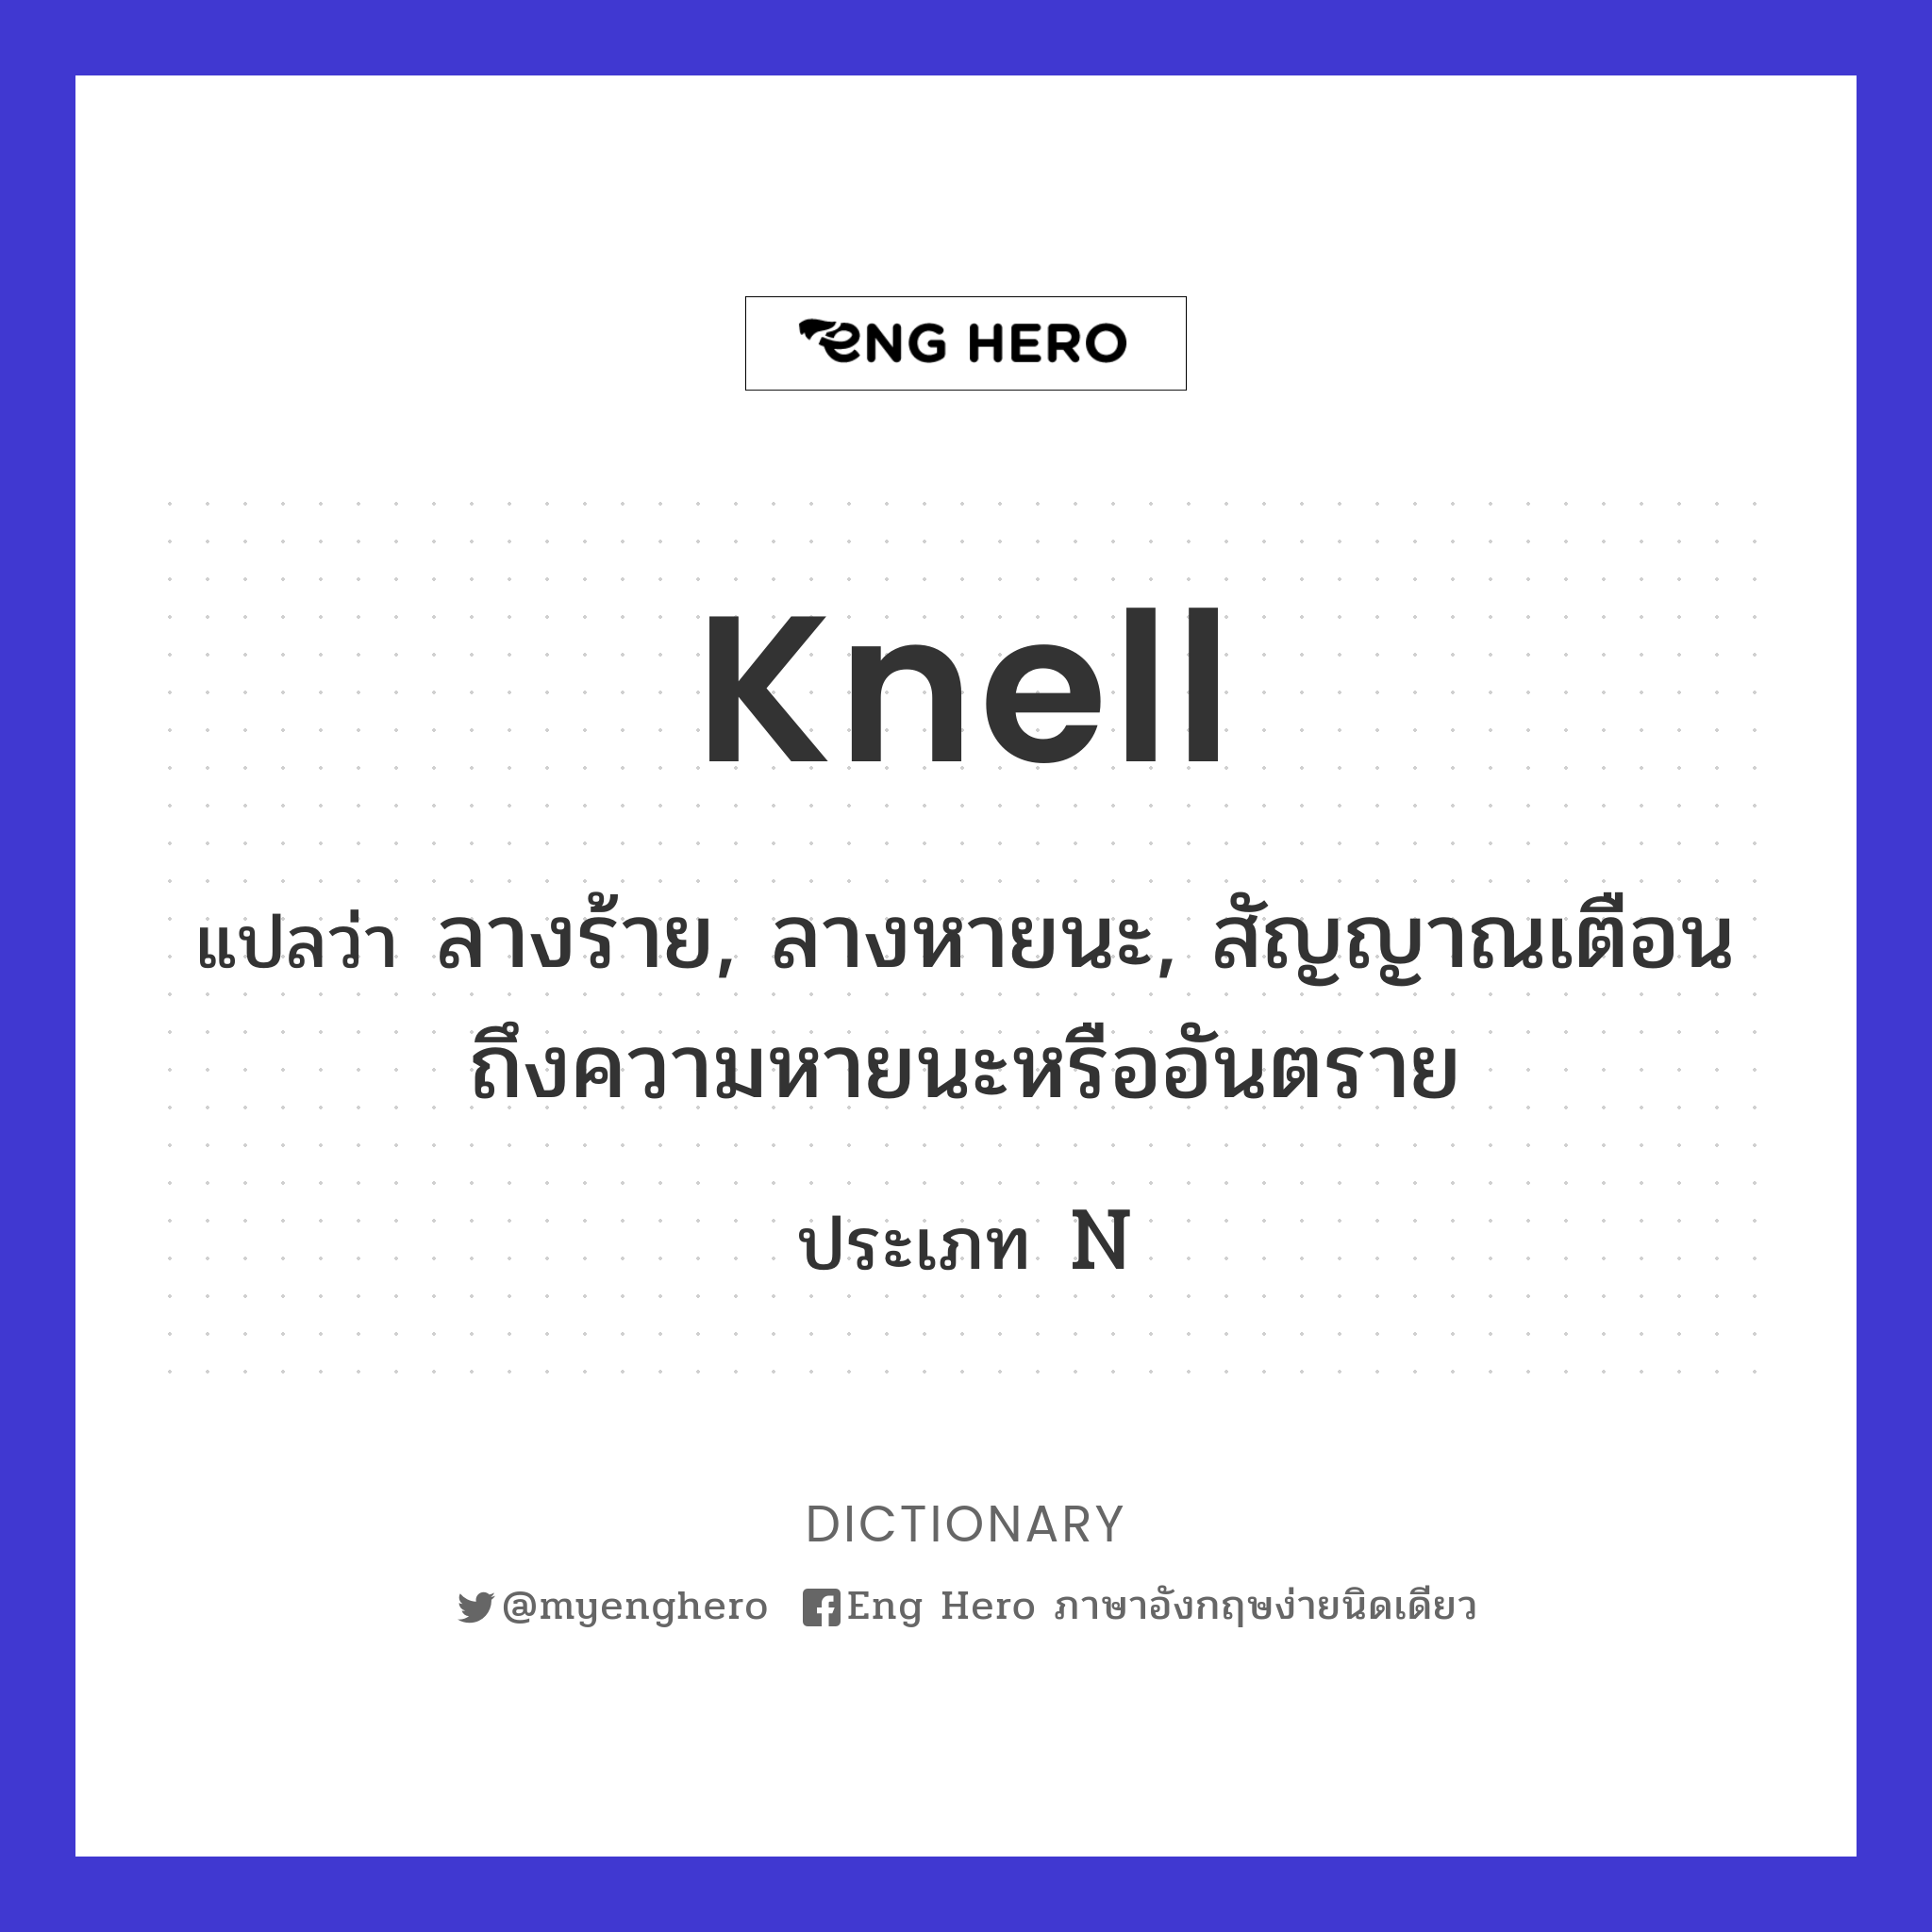 knell